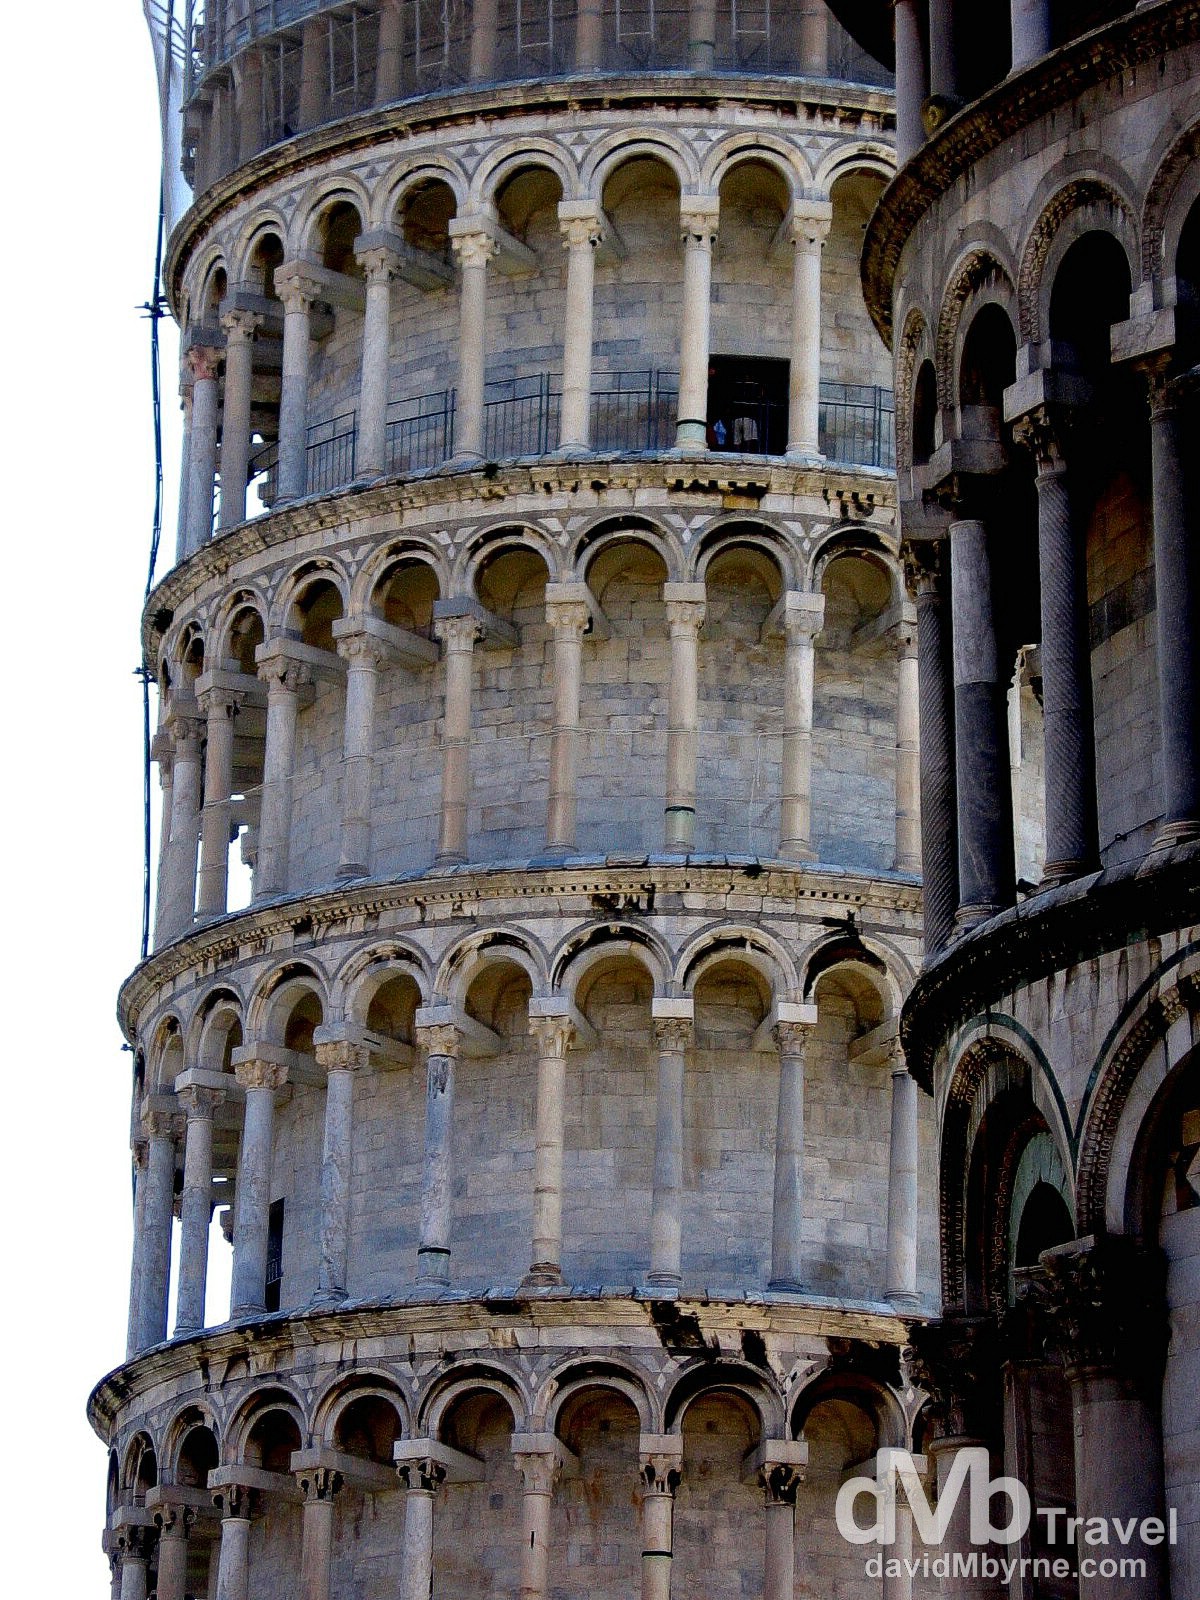 The famous leaning tower in Campo dei Miracoli (Field of Miracles), Pisa, Tuscany, Italy. August 31st, 2007.